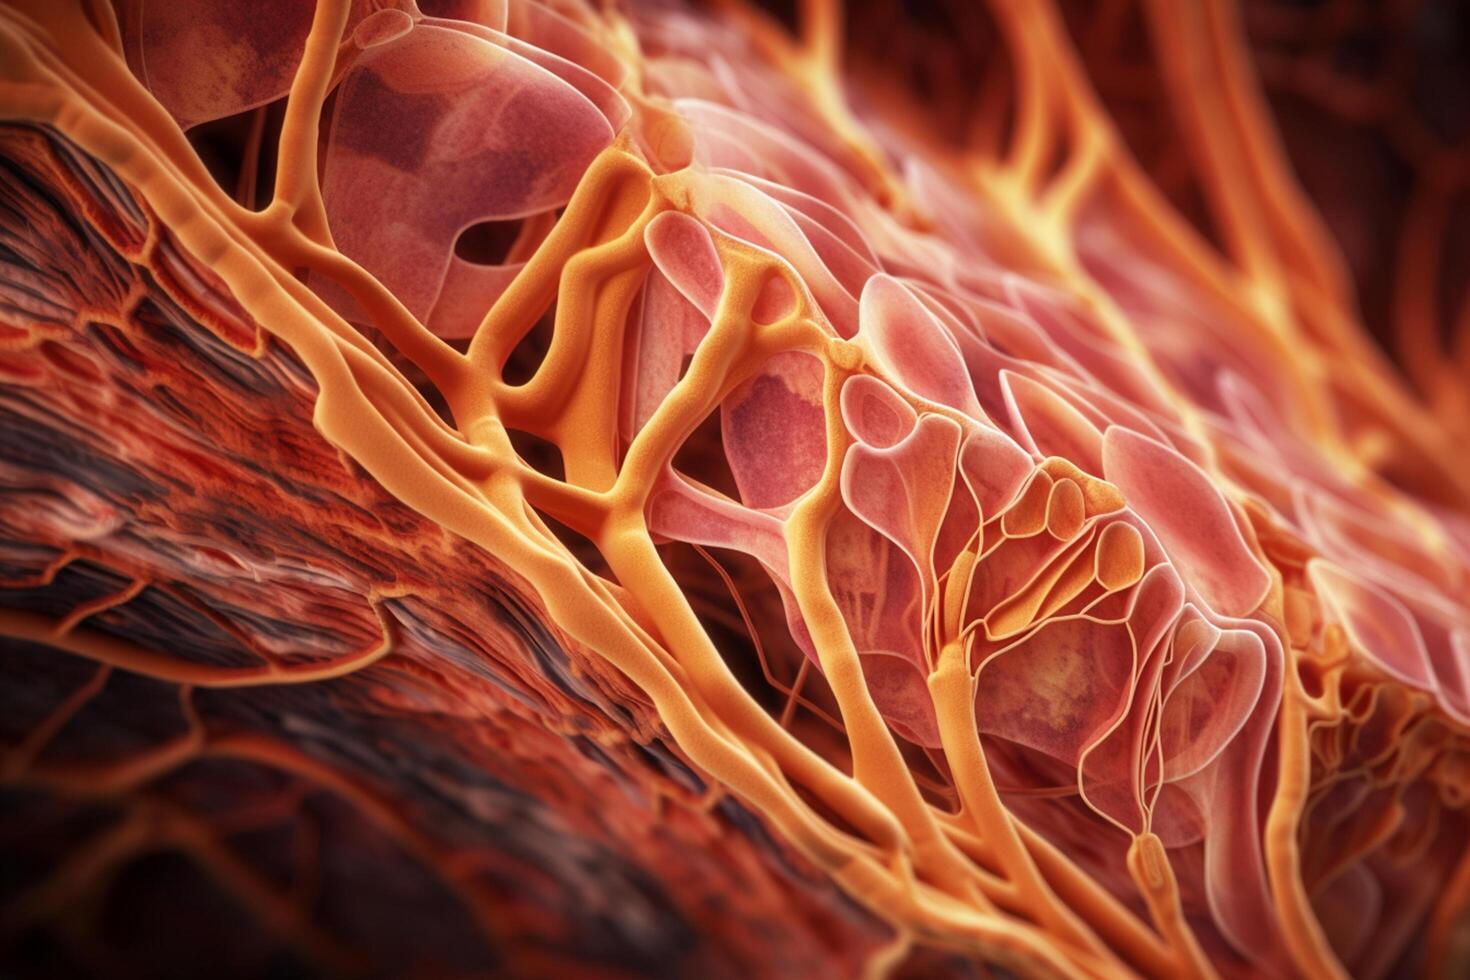 Colorful Abstract 3D Illustration of Muscle Fiber Relaxation at Microscopic Level photo